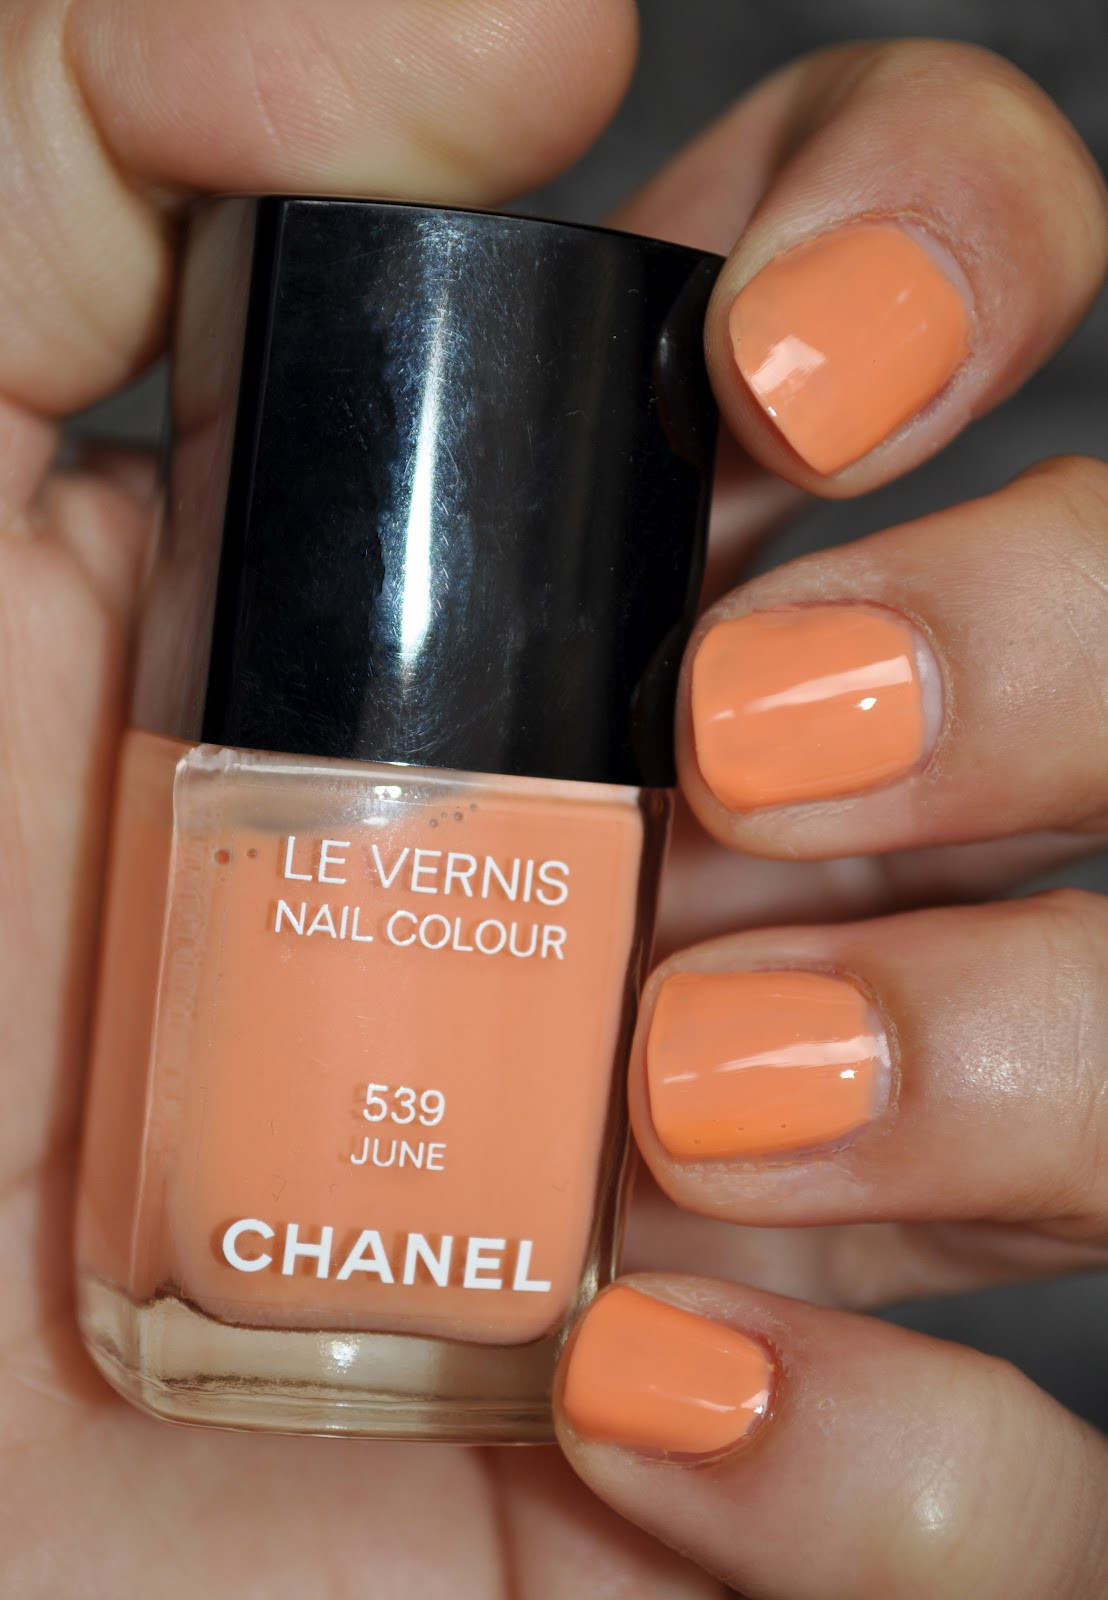 June Nail Colors
 So Lonely in Gorgeous Chanel & June